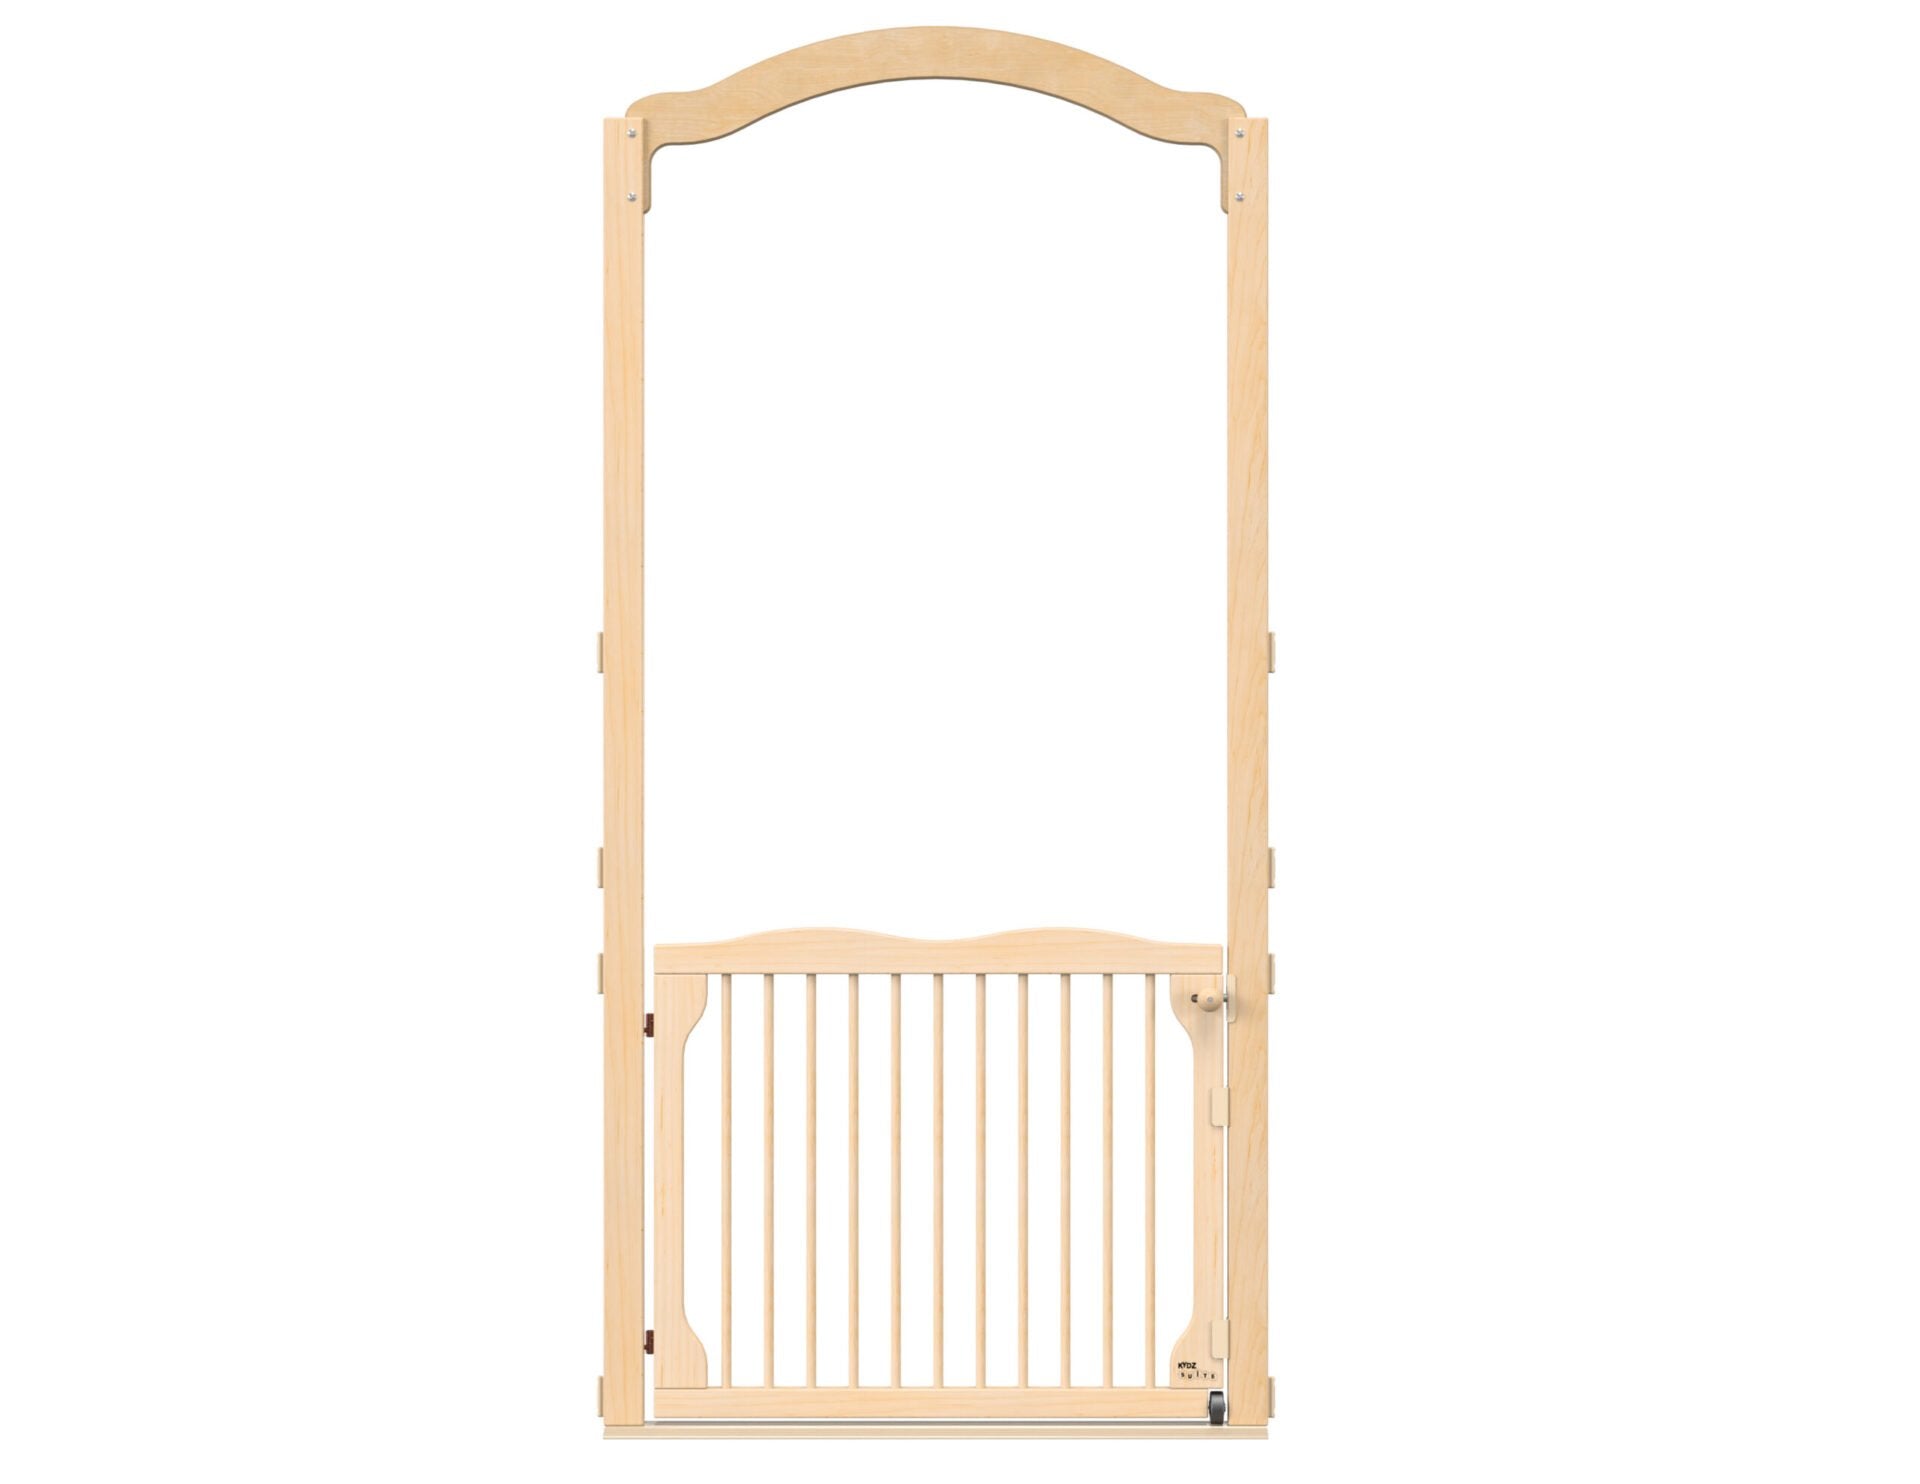 KYDZ SuiteÂ® Welcome Gate with Arch - Tall - 84